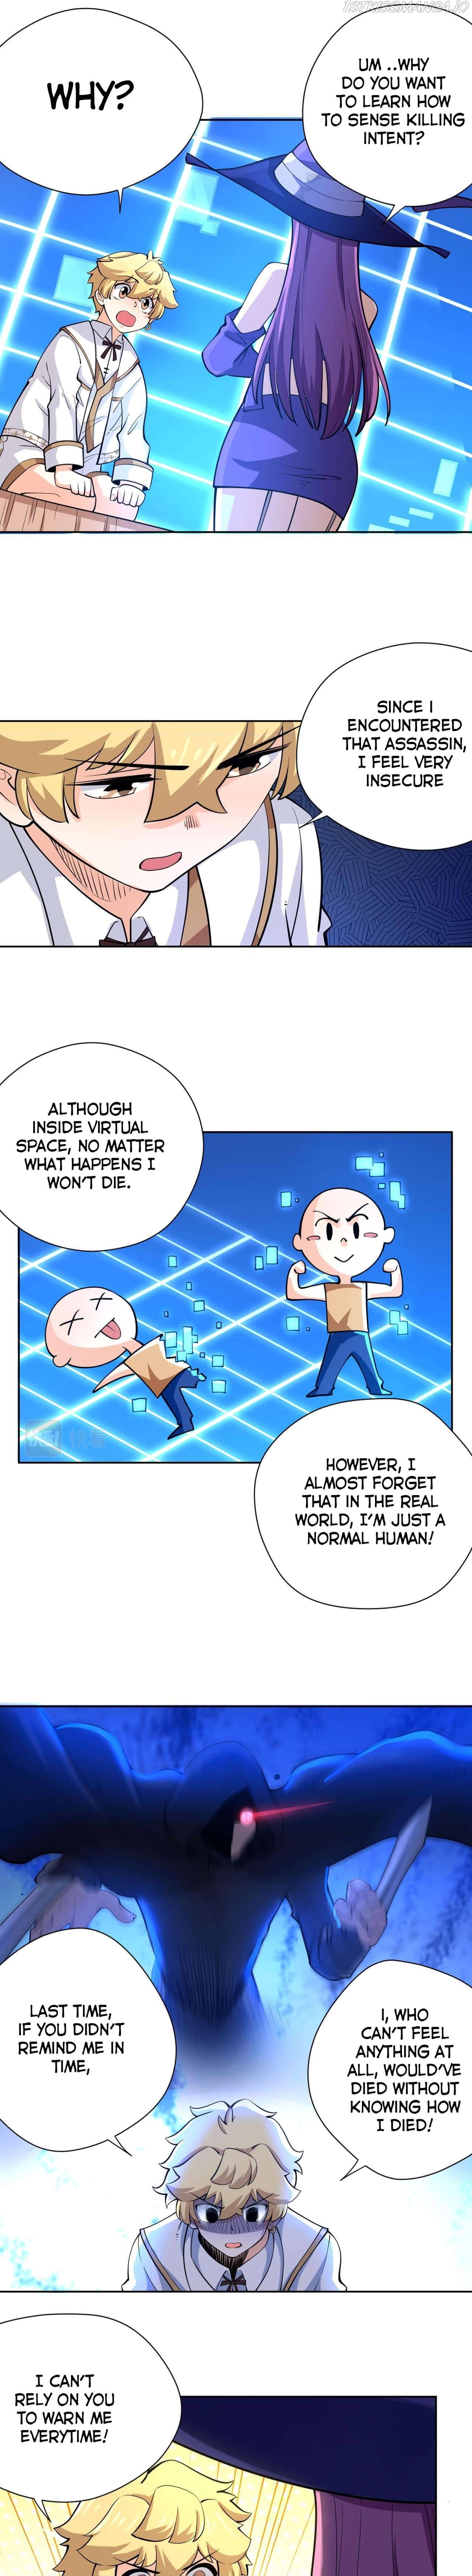 Learning Magic In Another World - Page 3